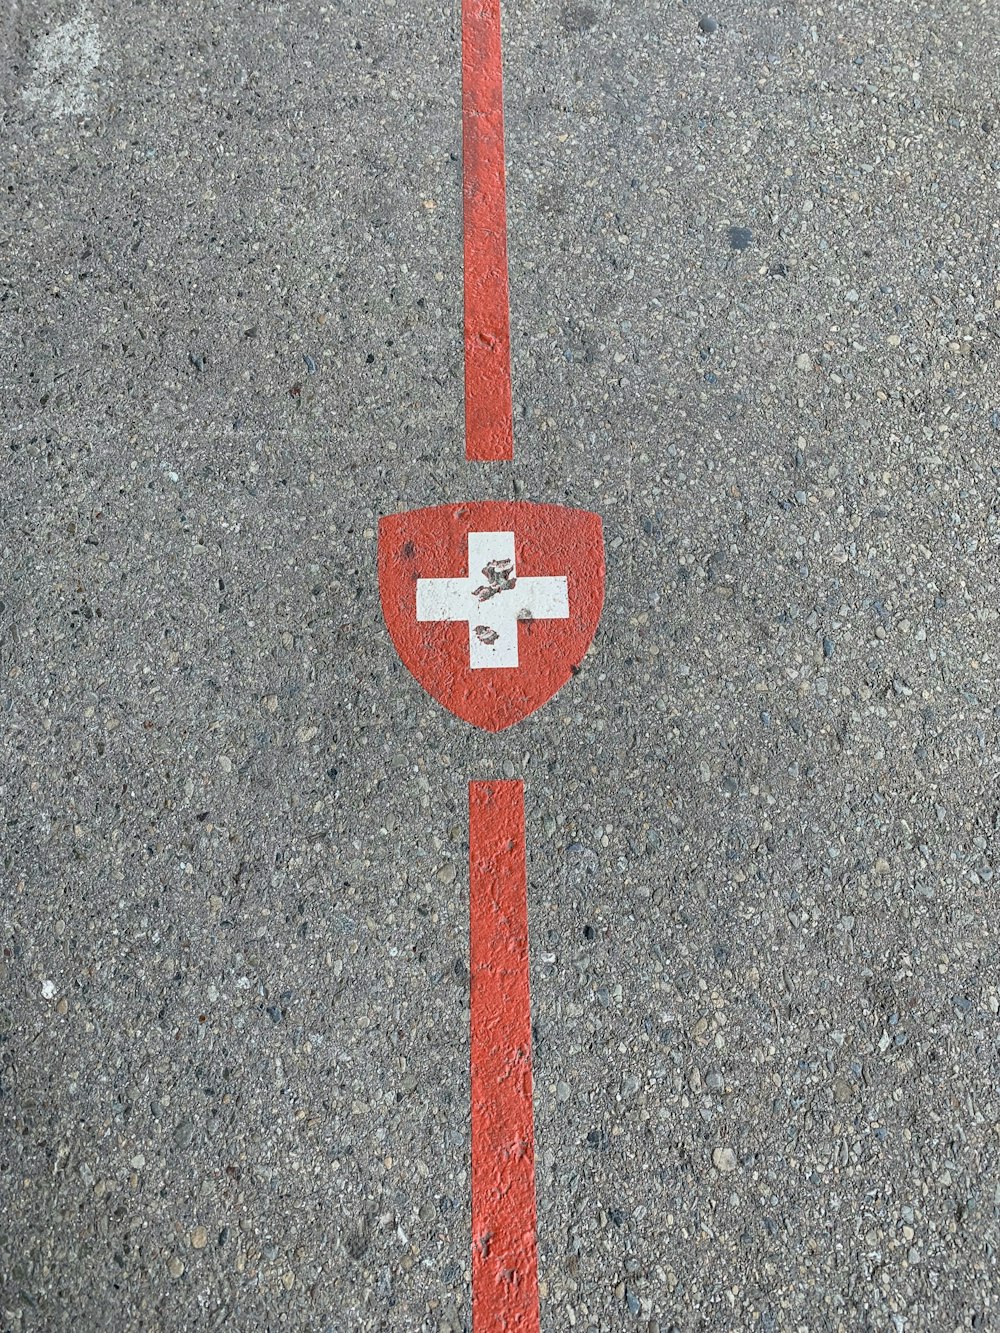 red and white cross logo